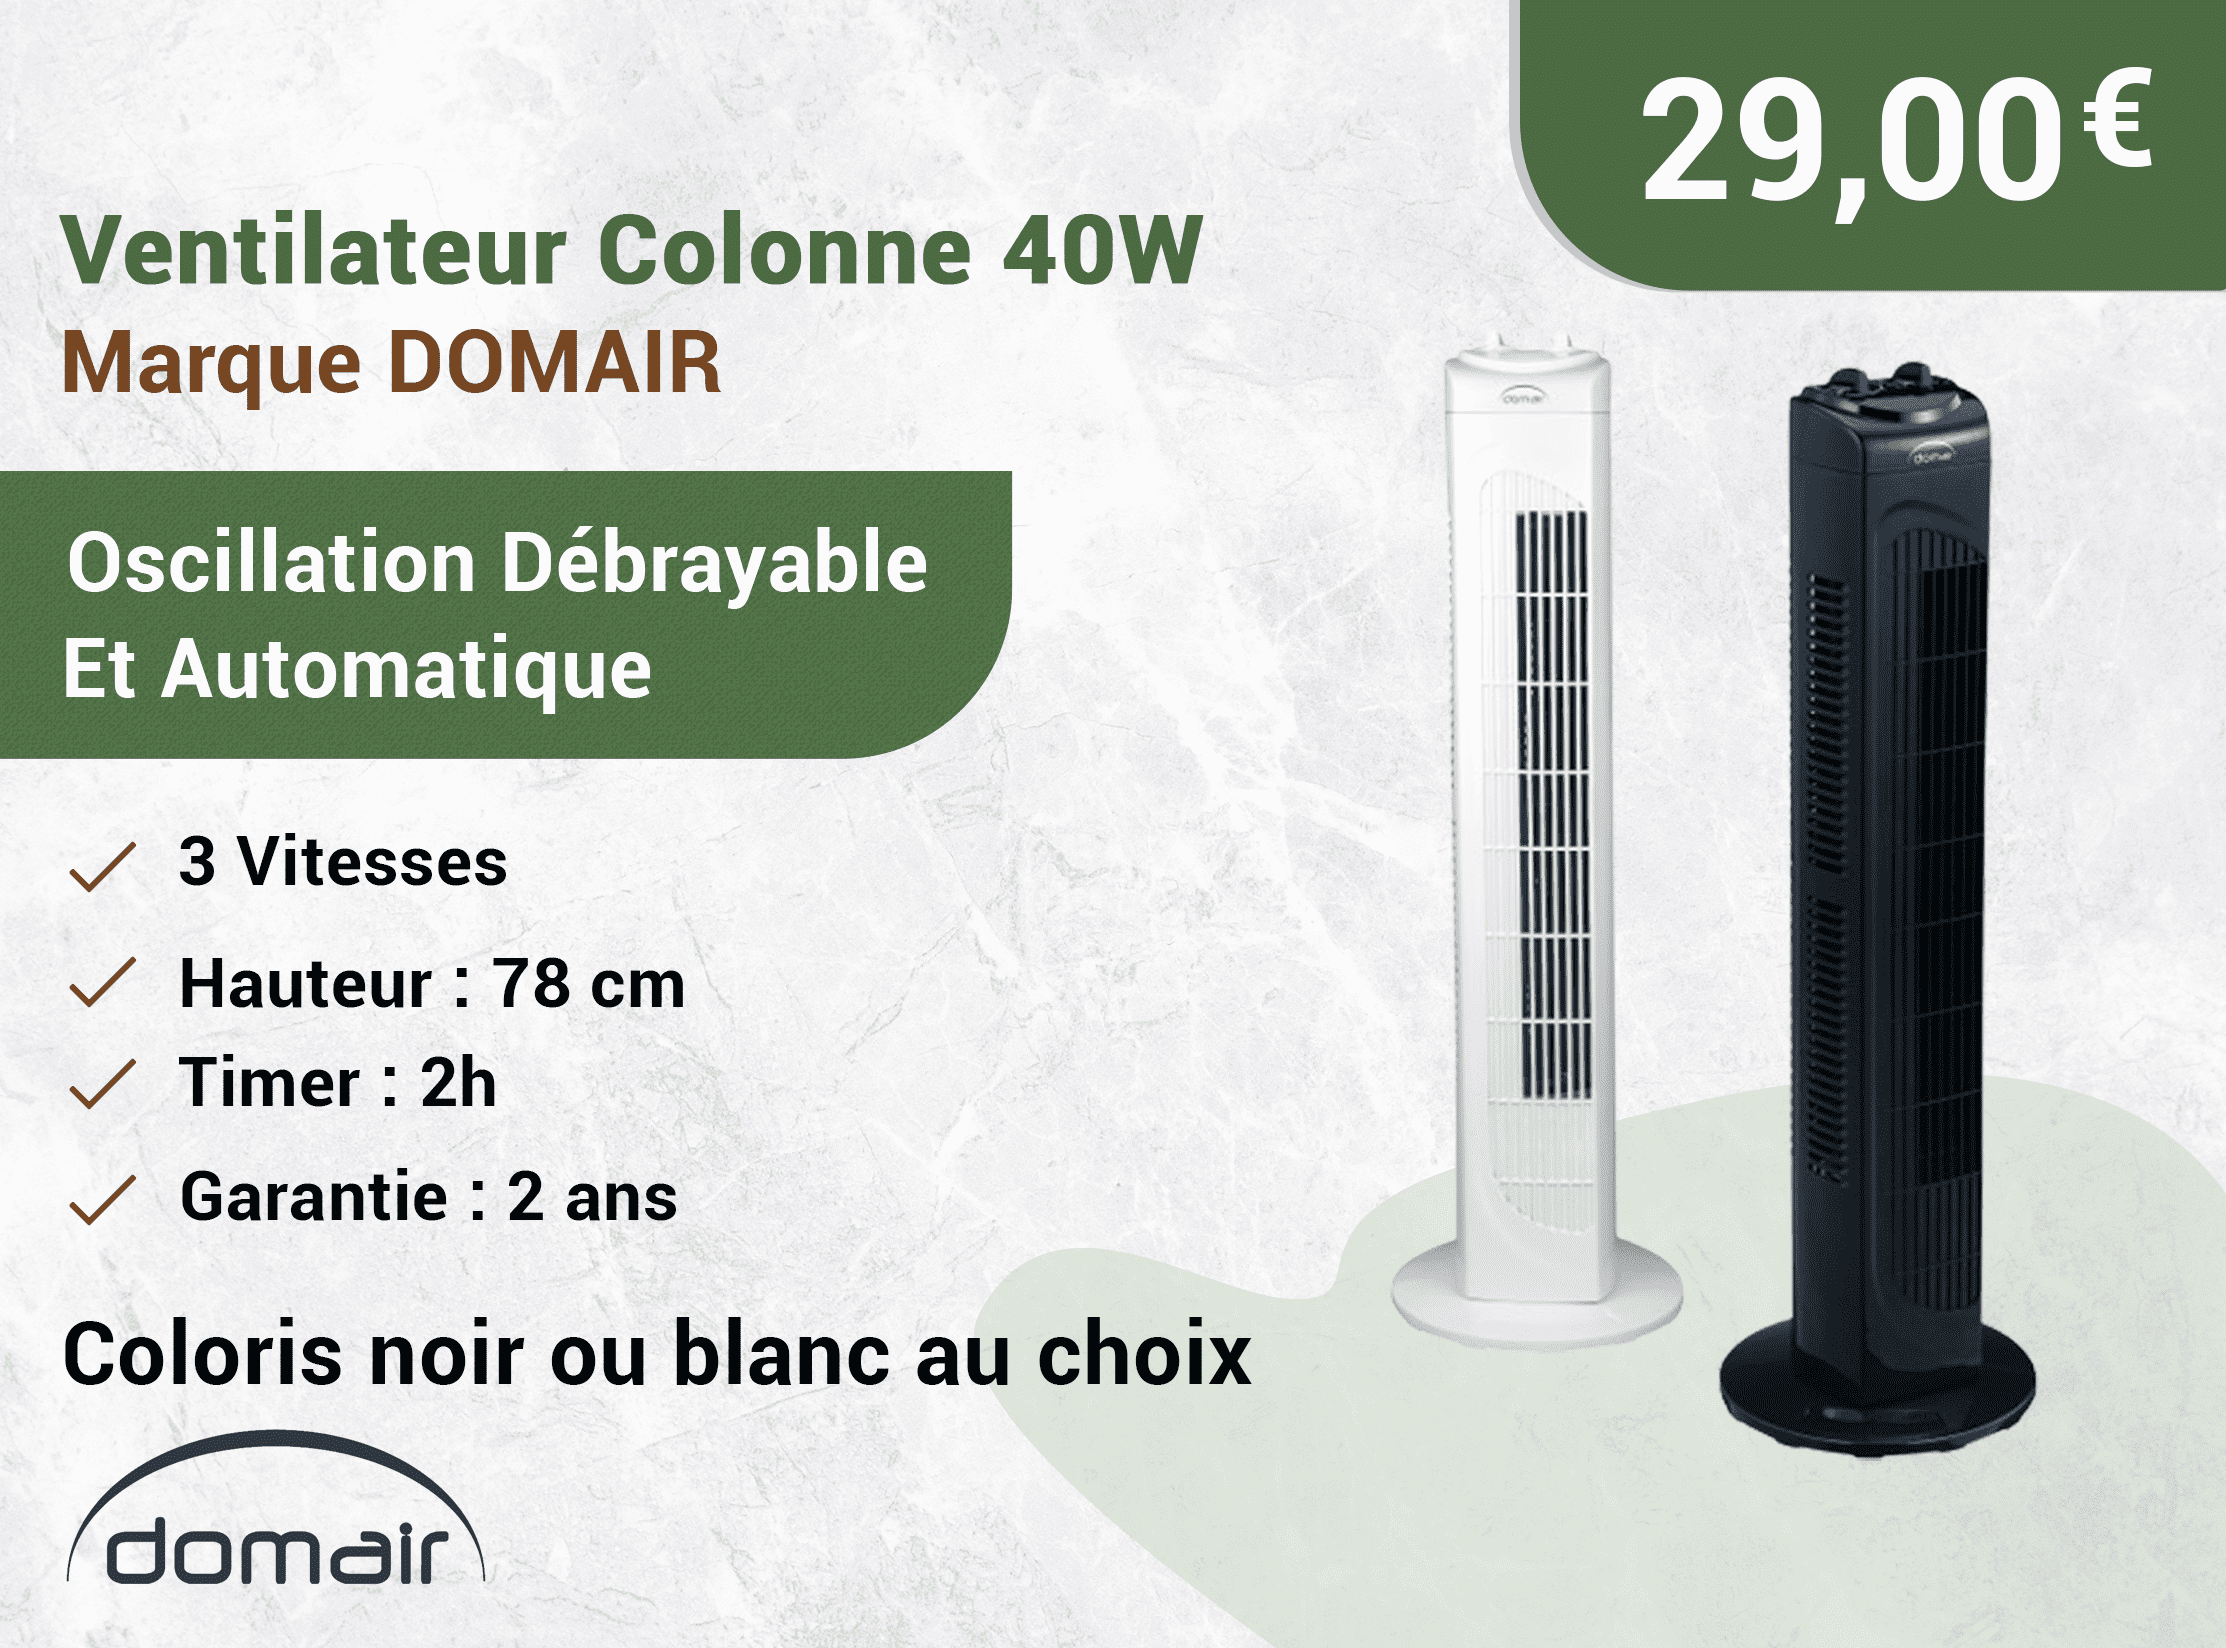 Chauffage d'appoint à technologie thermo céramique Fast Heater blanc